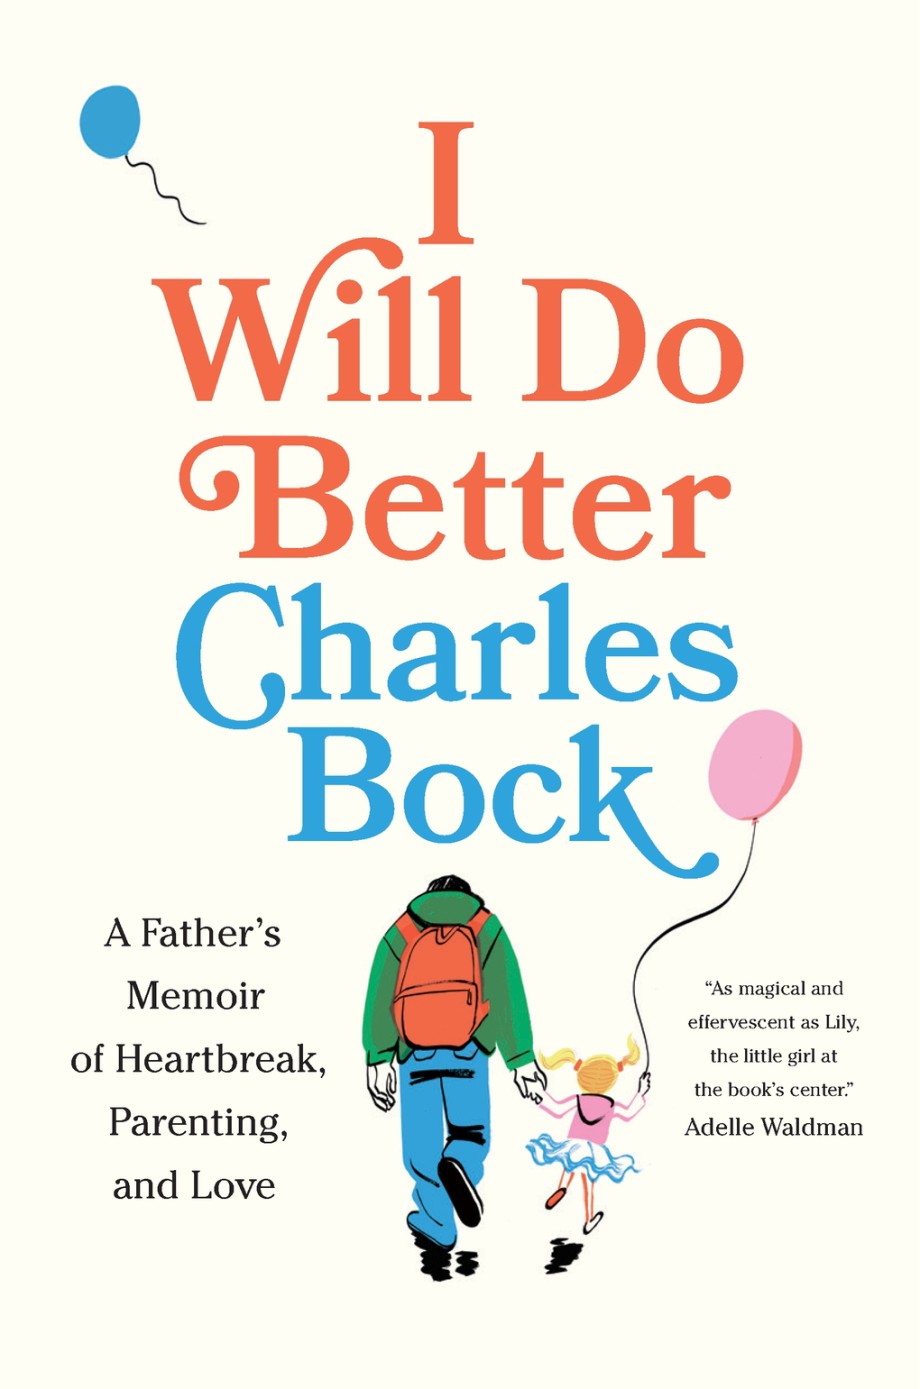 I Will Do Better A Father’s Memoir of Heartbreak, Parenting, and Love